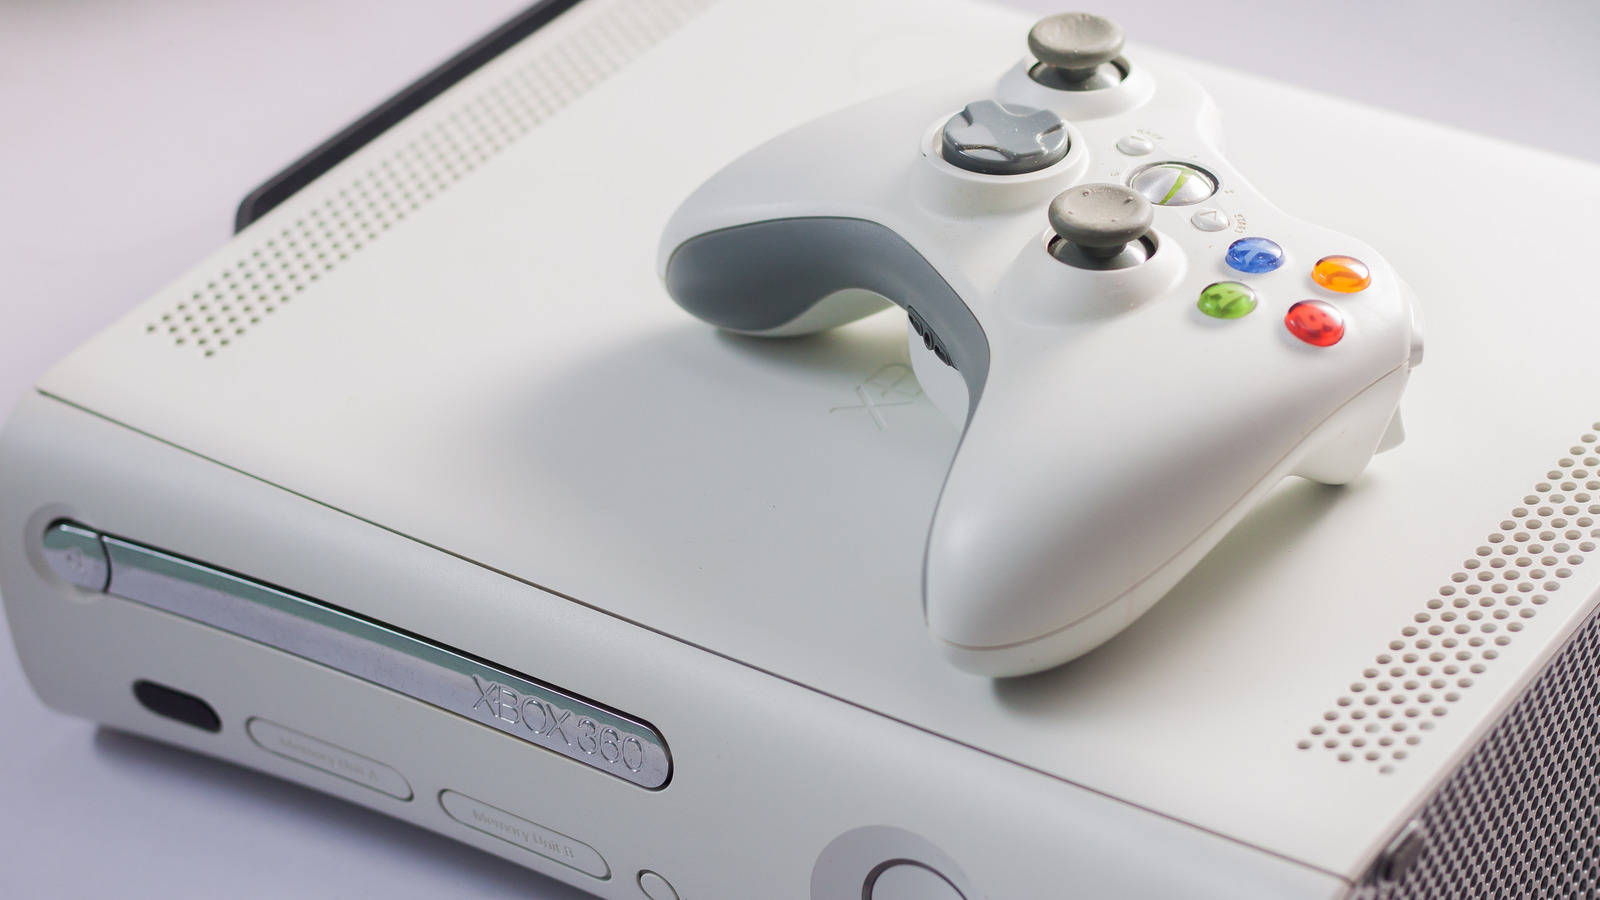 Buy Your Xbox 360 Games Now, Before the Store Shuts Down